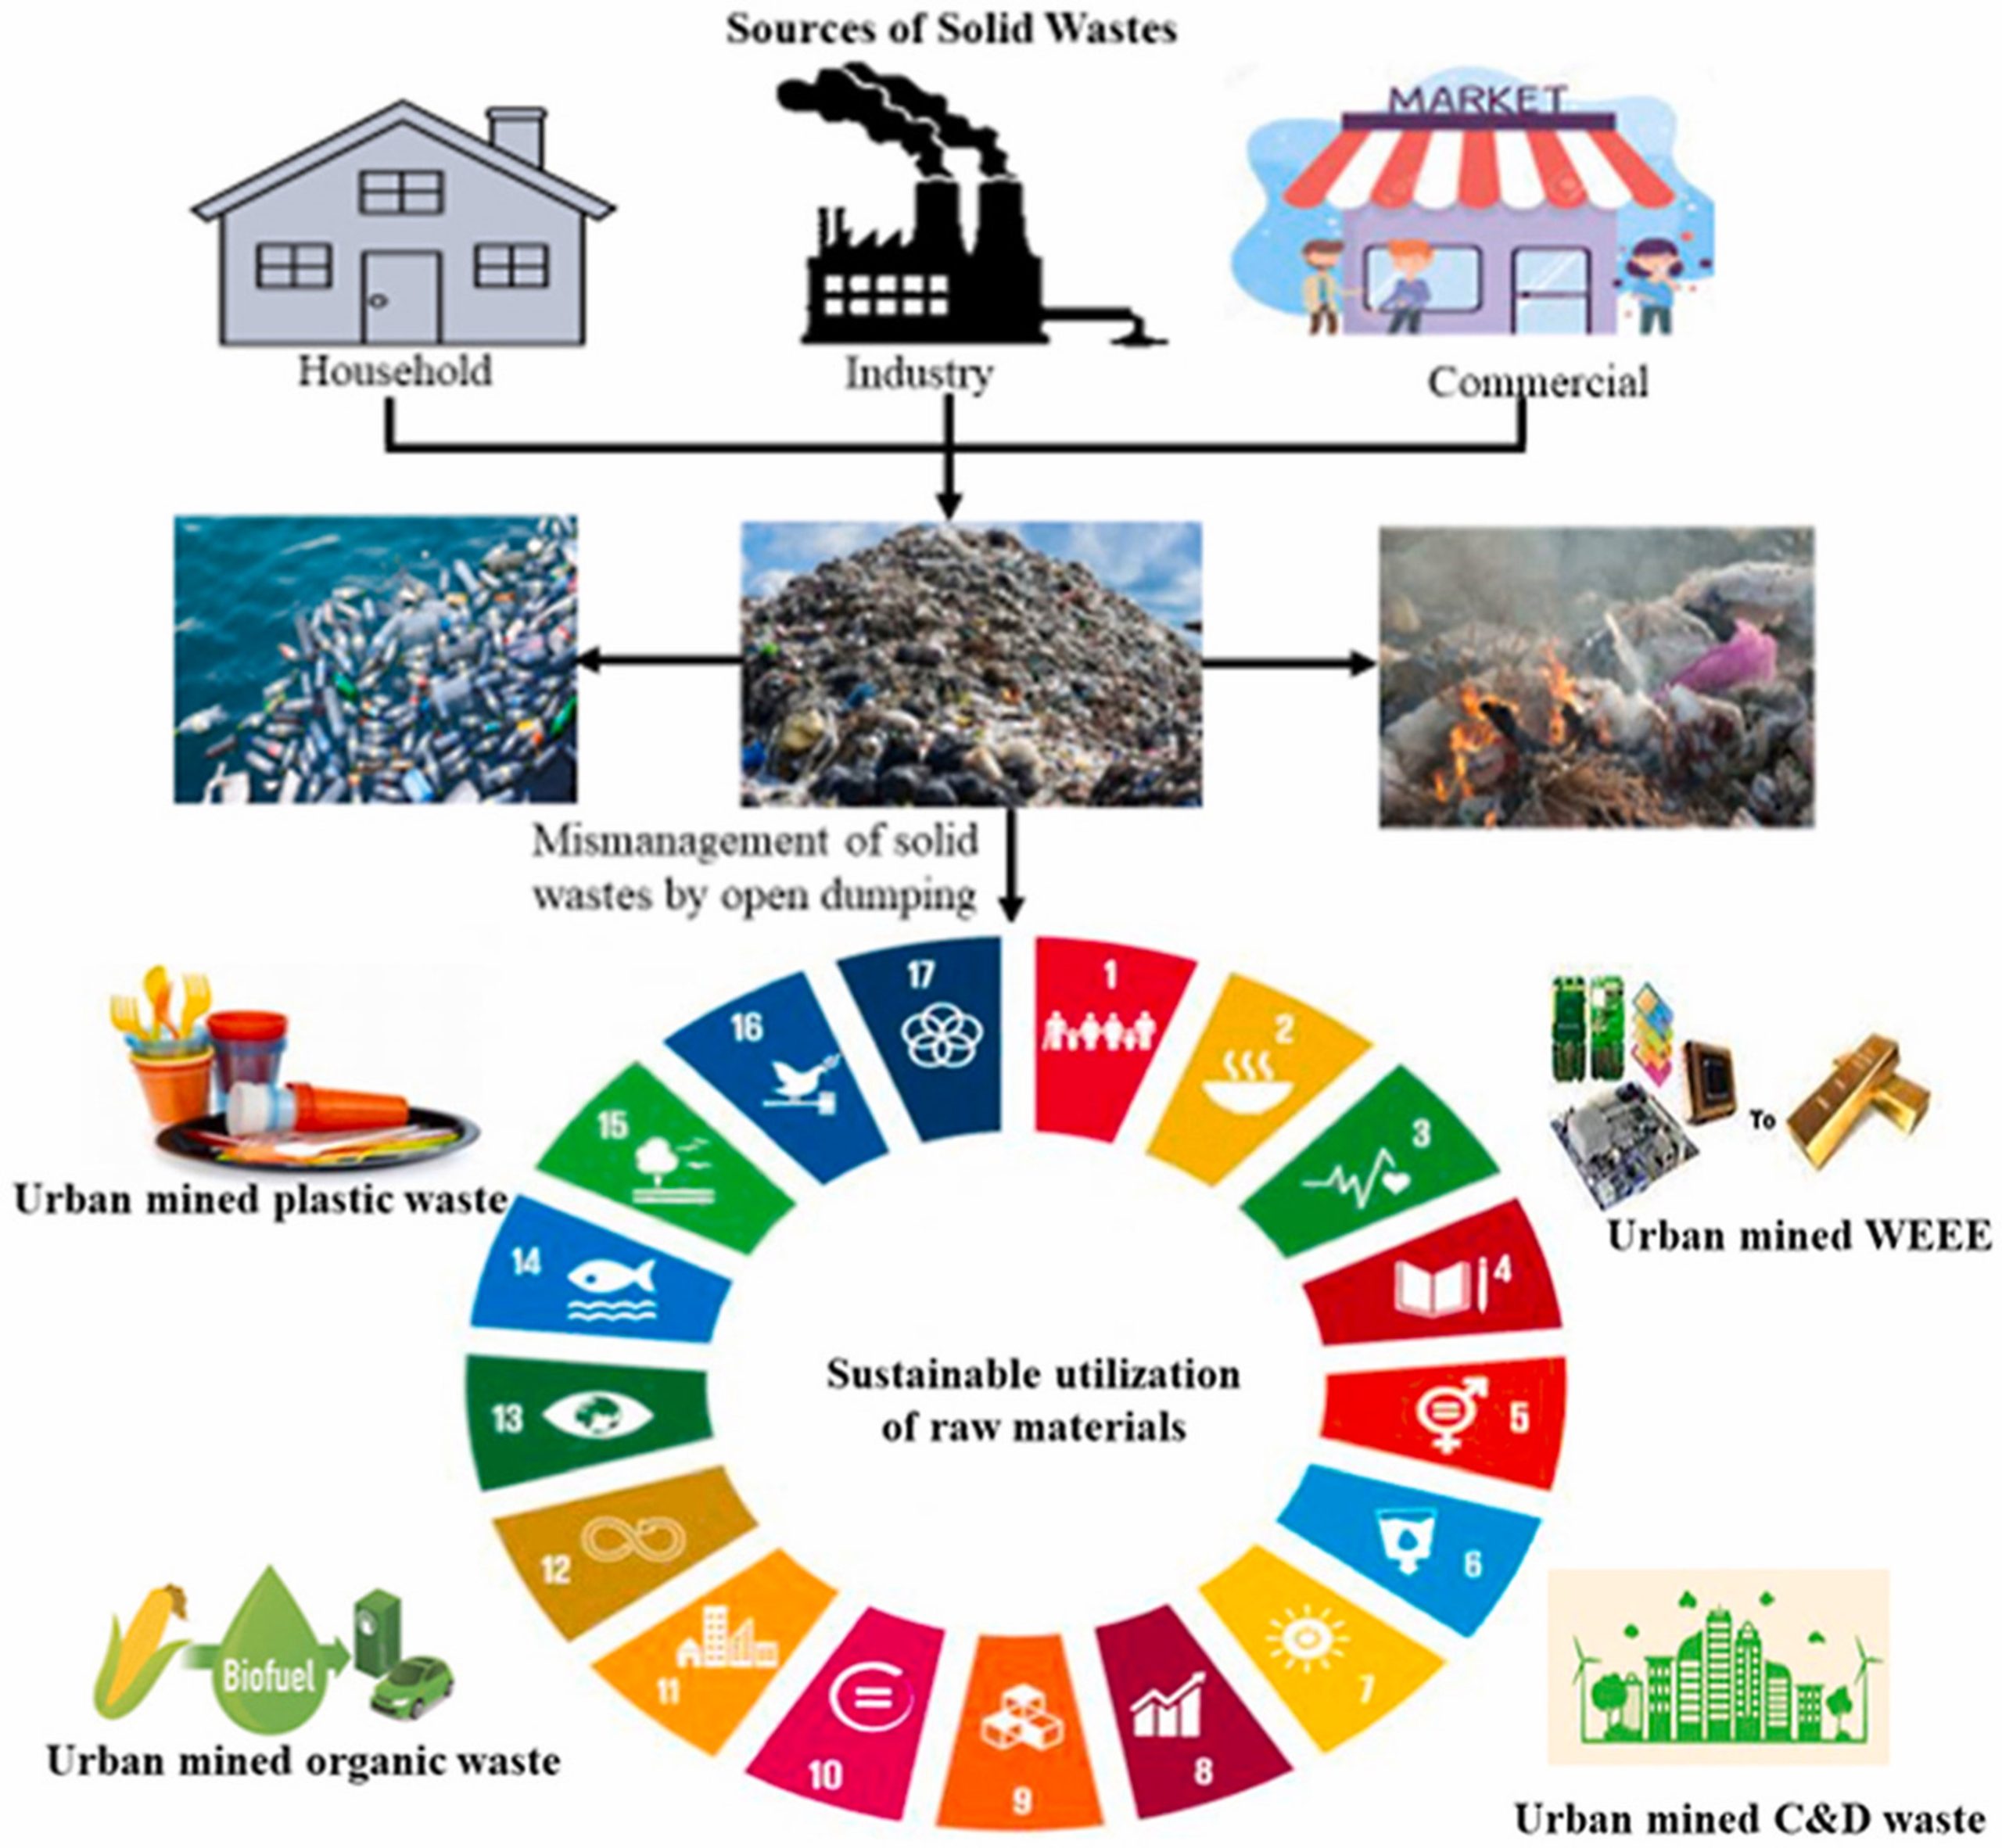 Sustainable approach for valorization of solid wastes as a secondary resource through urban mining 